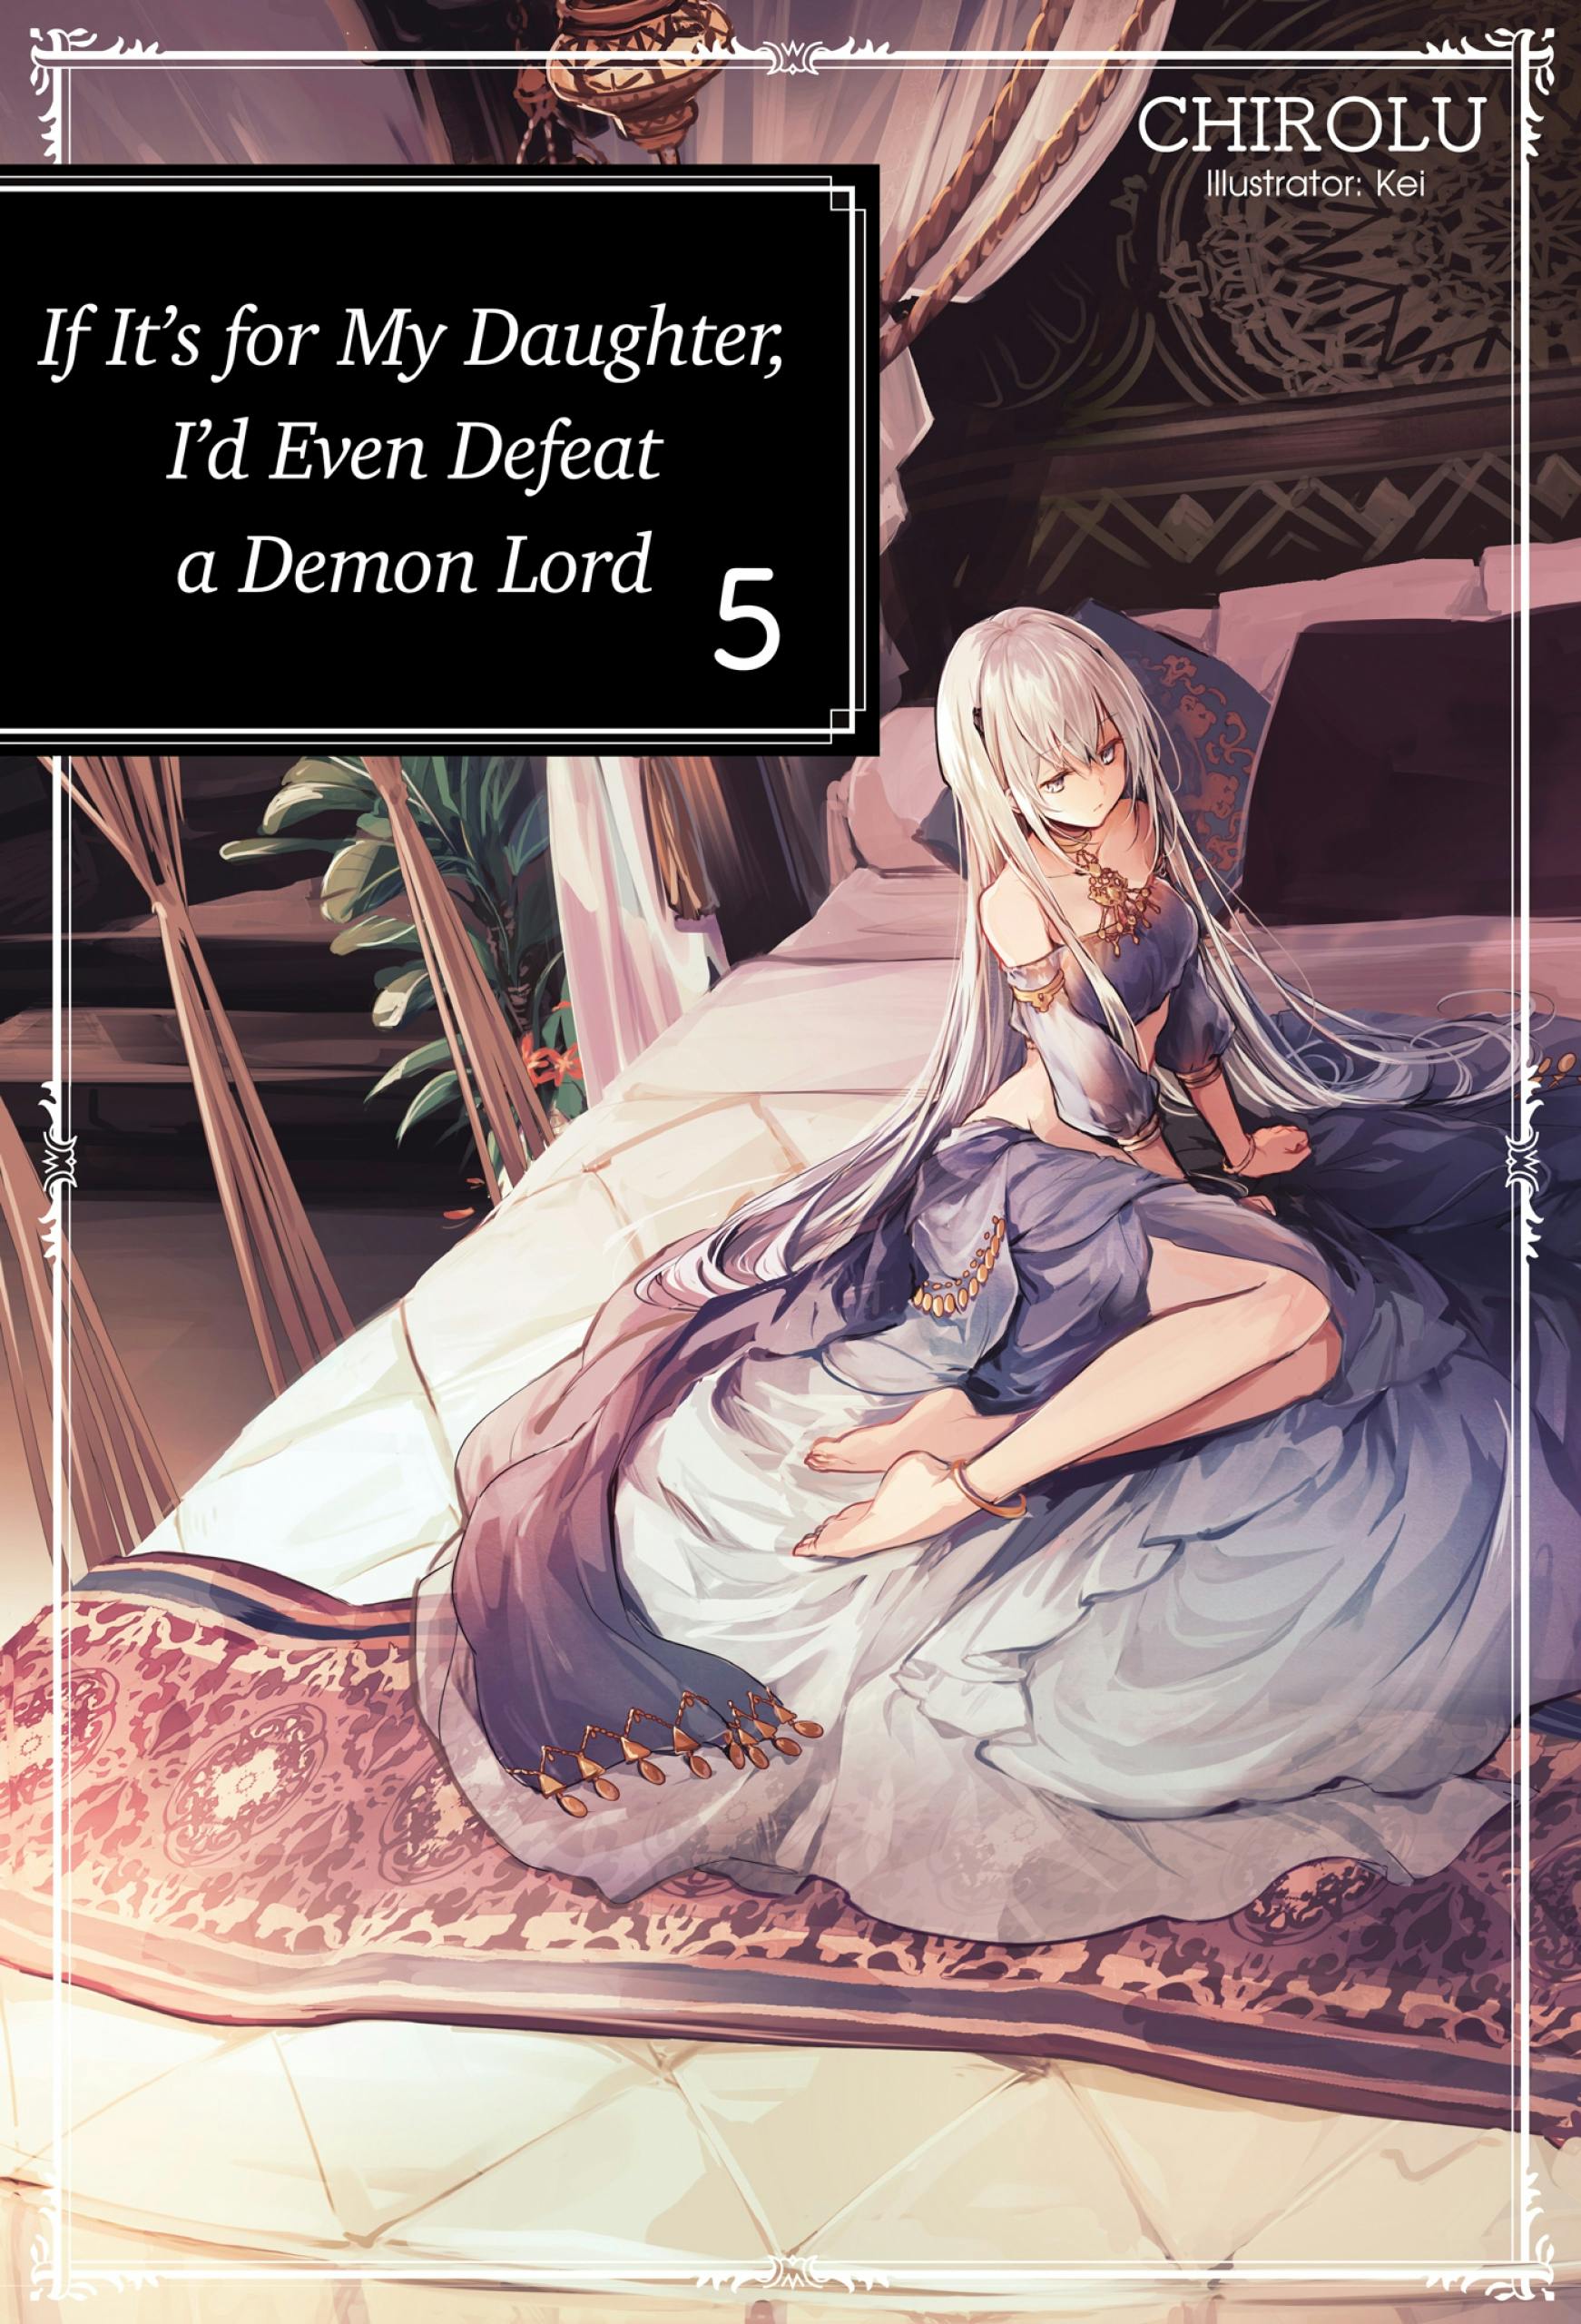 If It’s for My Daughter, I’d Even Defeat a Demon Lord: Volume 5 - CHIROLU